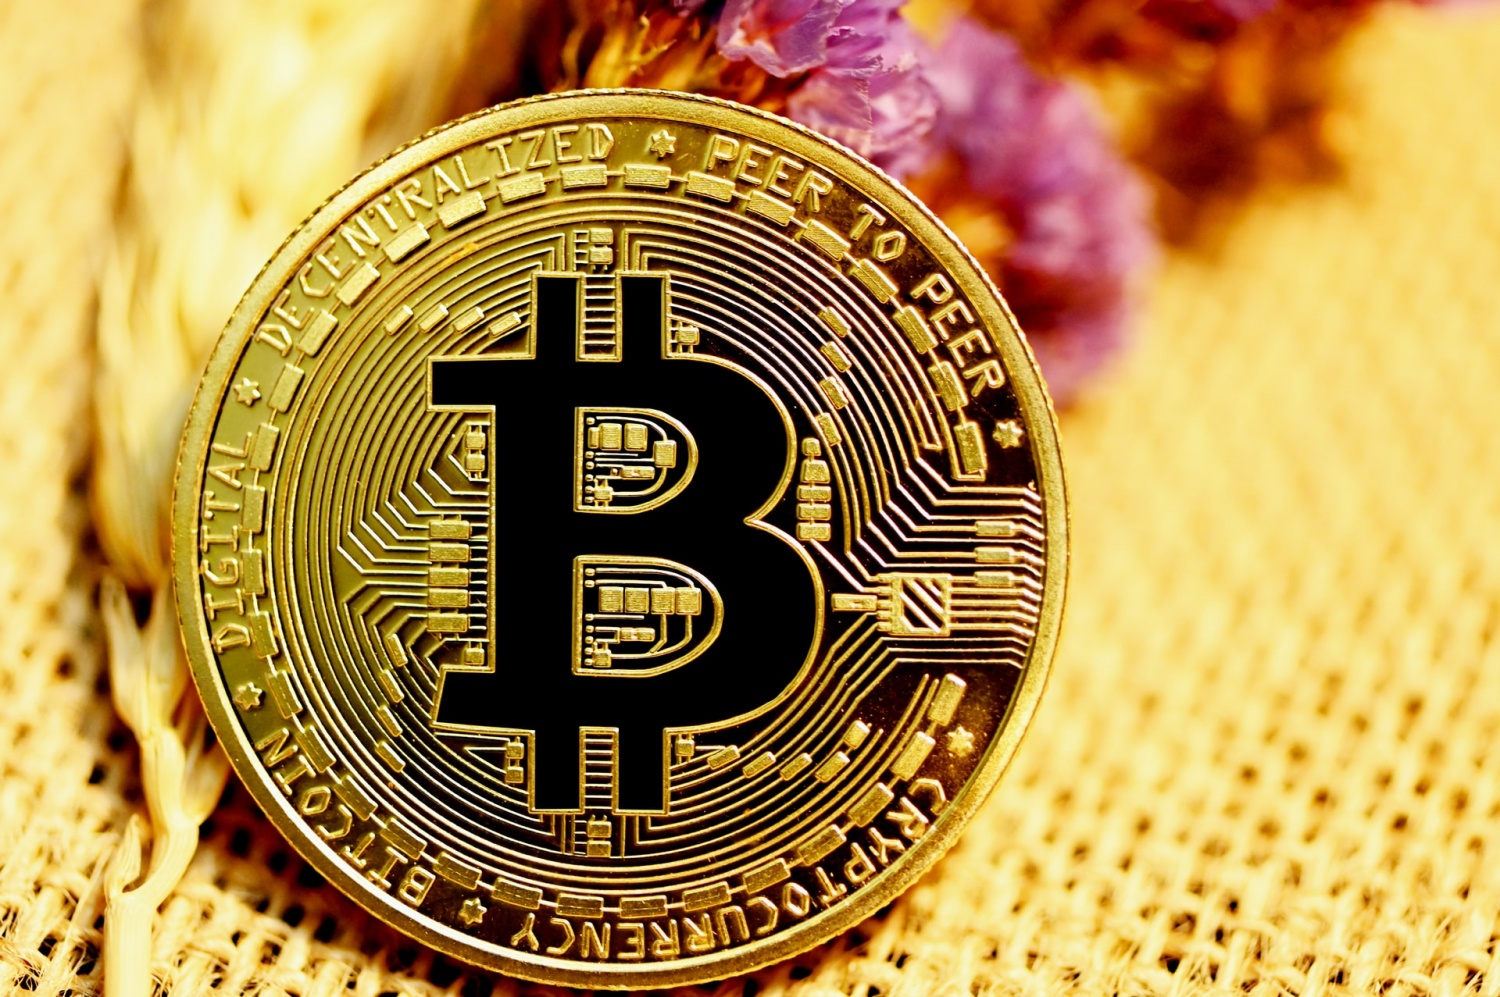 Bitcoin Price Prediction: Experts Warn 'Systemic Risk' That Can Cause Major Trouble for BTC